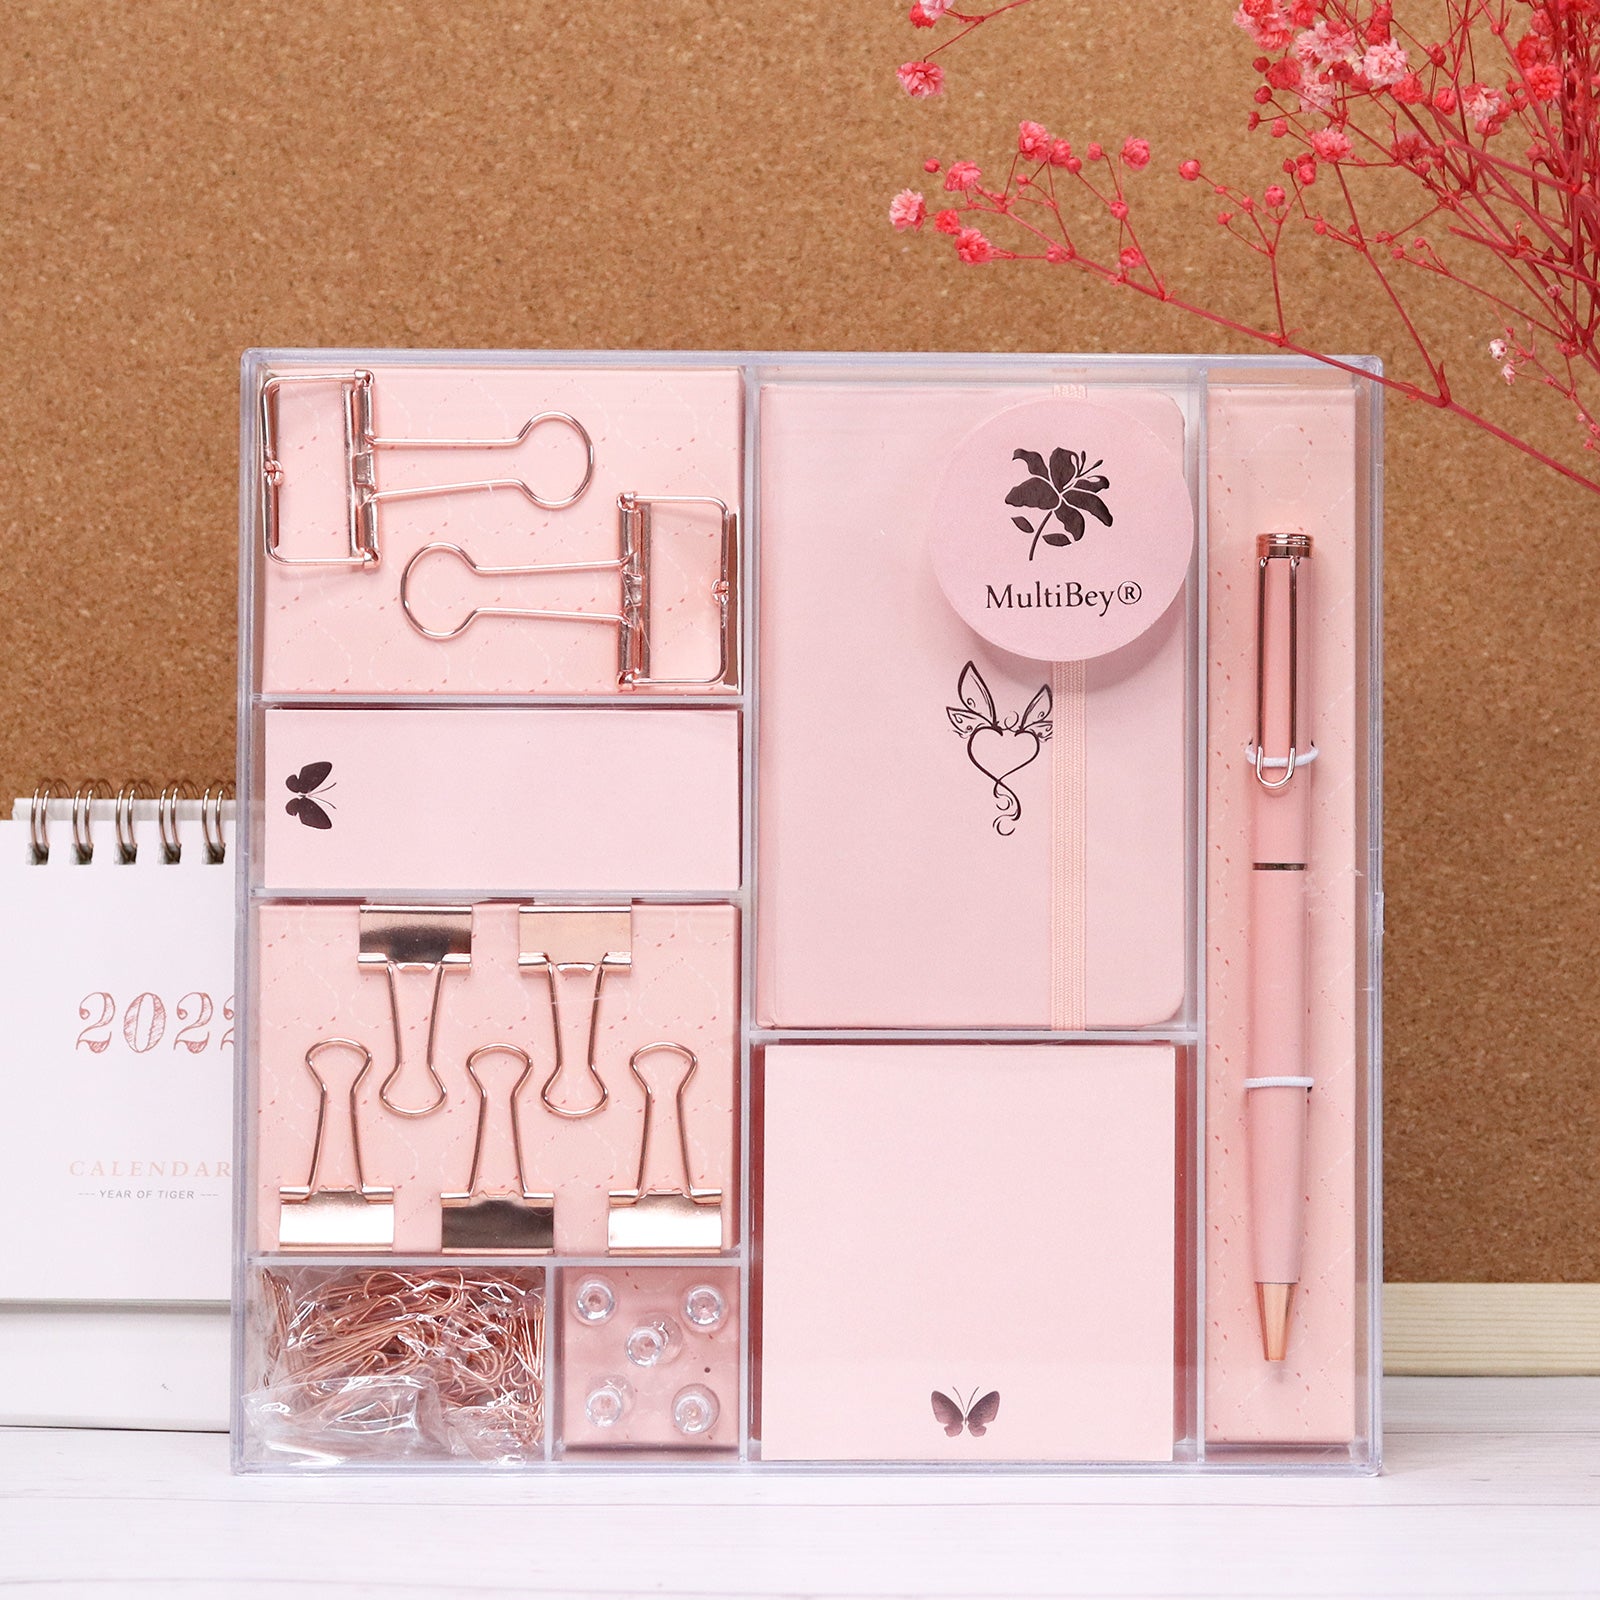 2 Piece Gift Set  Stationery Pink Floral Stationary For Women